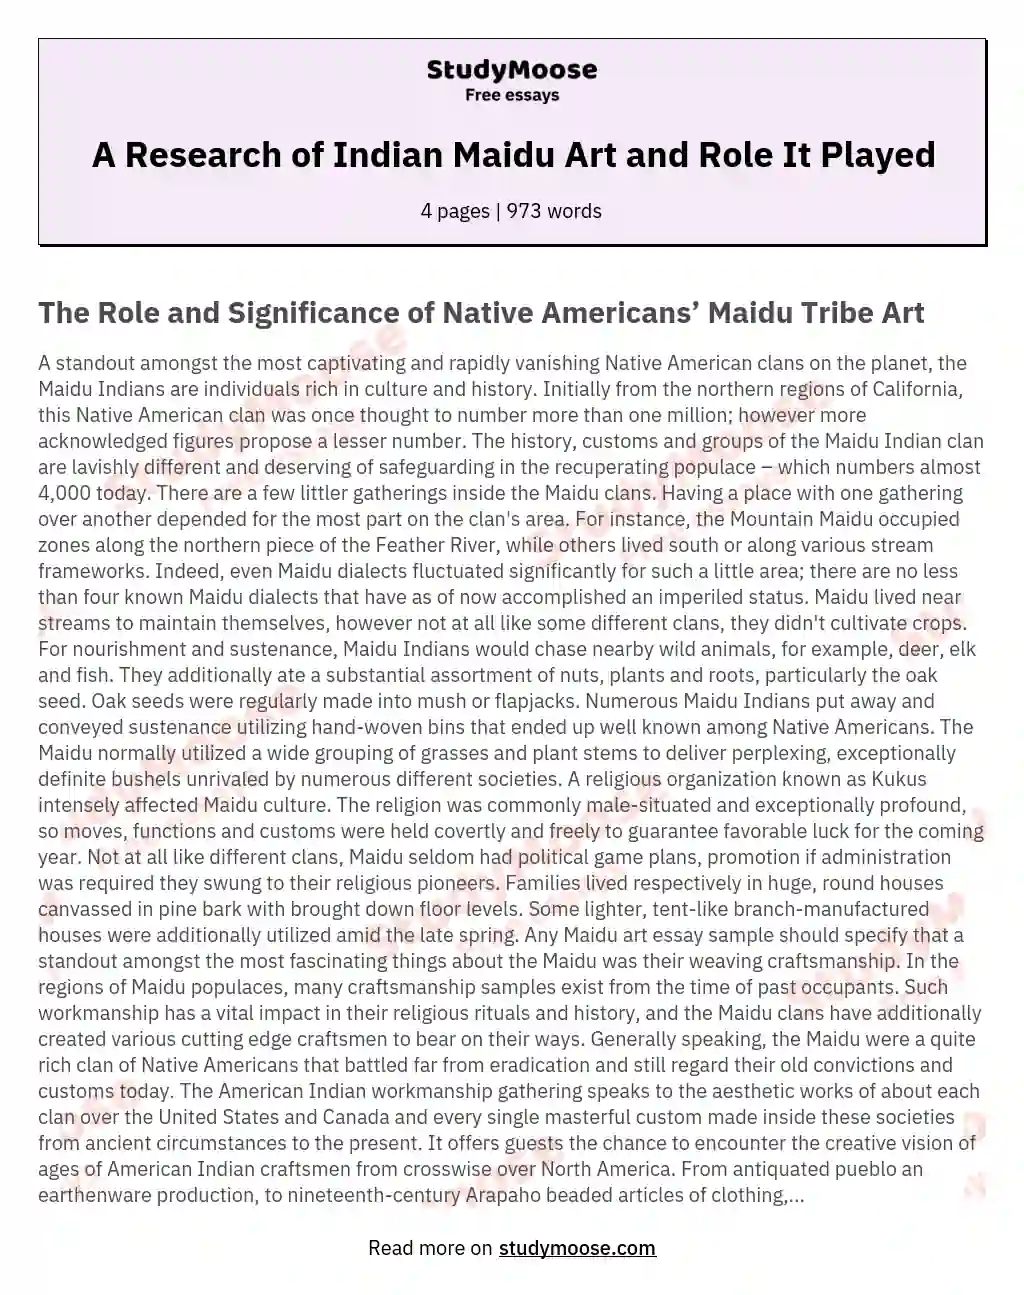 A Research of Indian Maidu Art and Role It Played essay